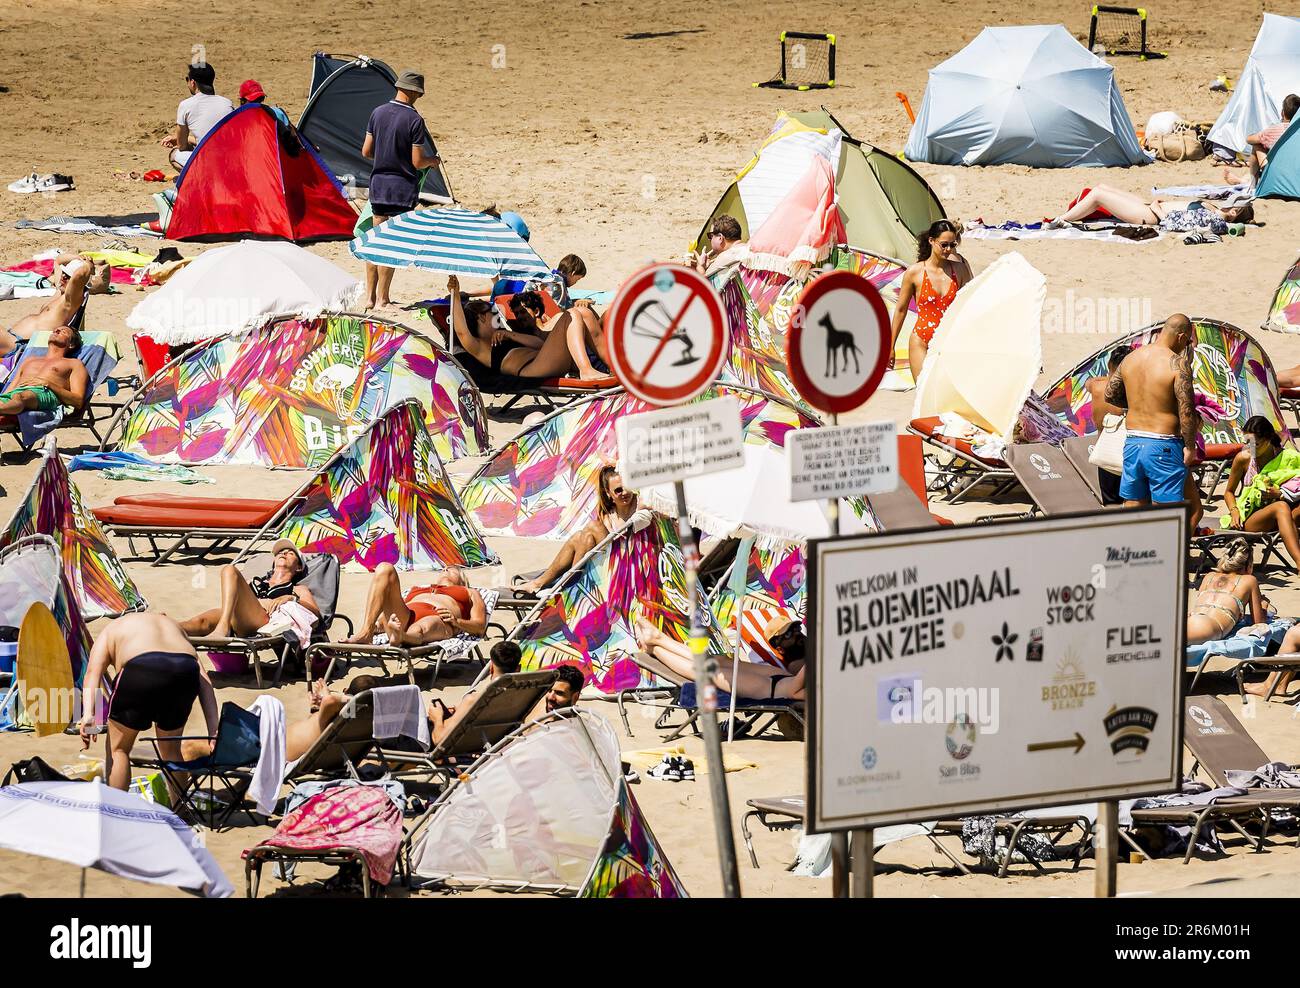 BLOEMENDAAL AAN ZEE - Crowds on the beach of Bloemendaal aan Zee. There are high temperatures on the first tropical weekend of the year. ANP REMKO DE WAAL netherlands out - belgium out Credit: ANP/Alamy Live News Stock Photo